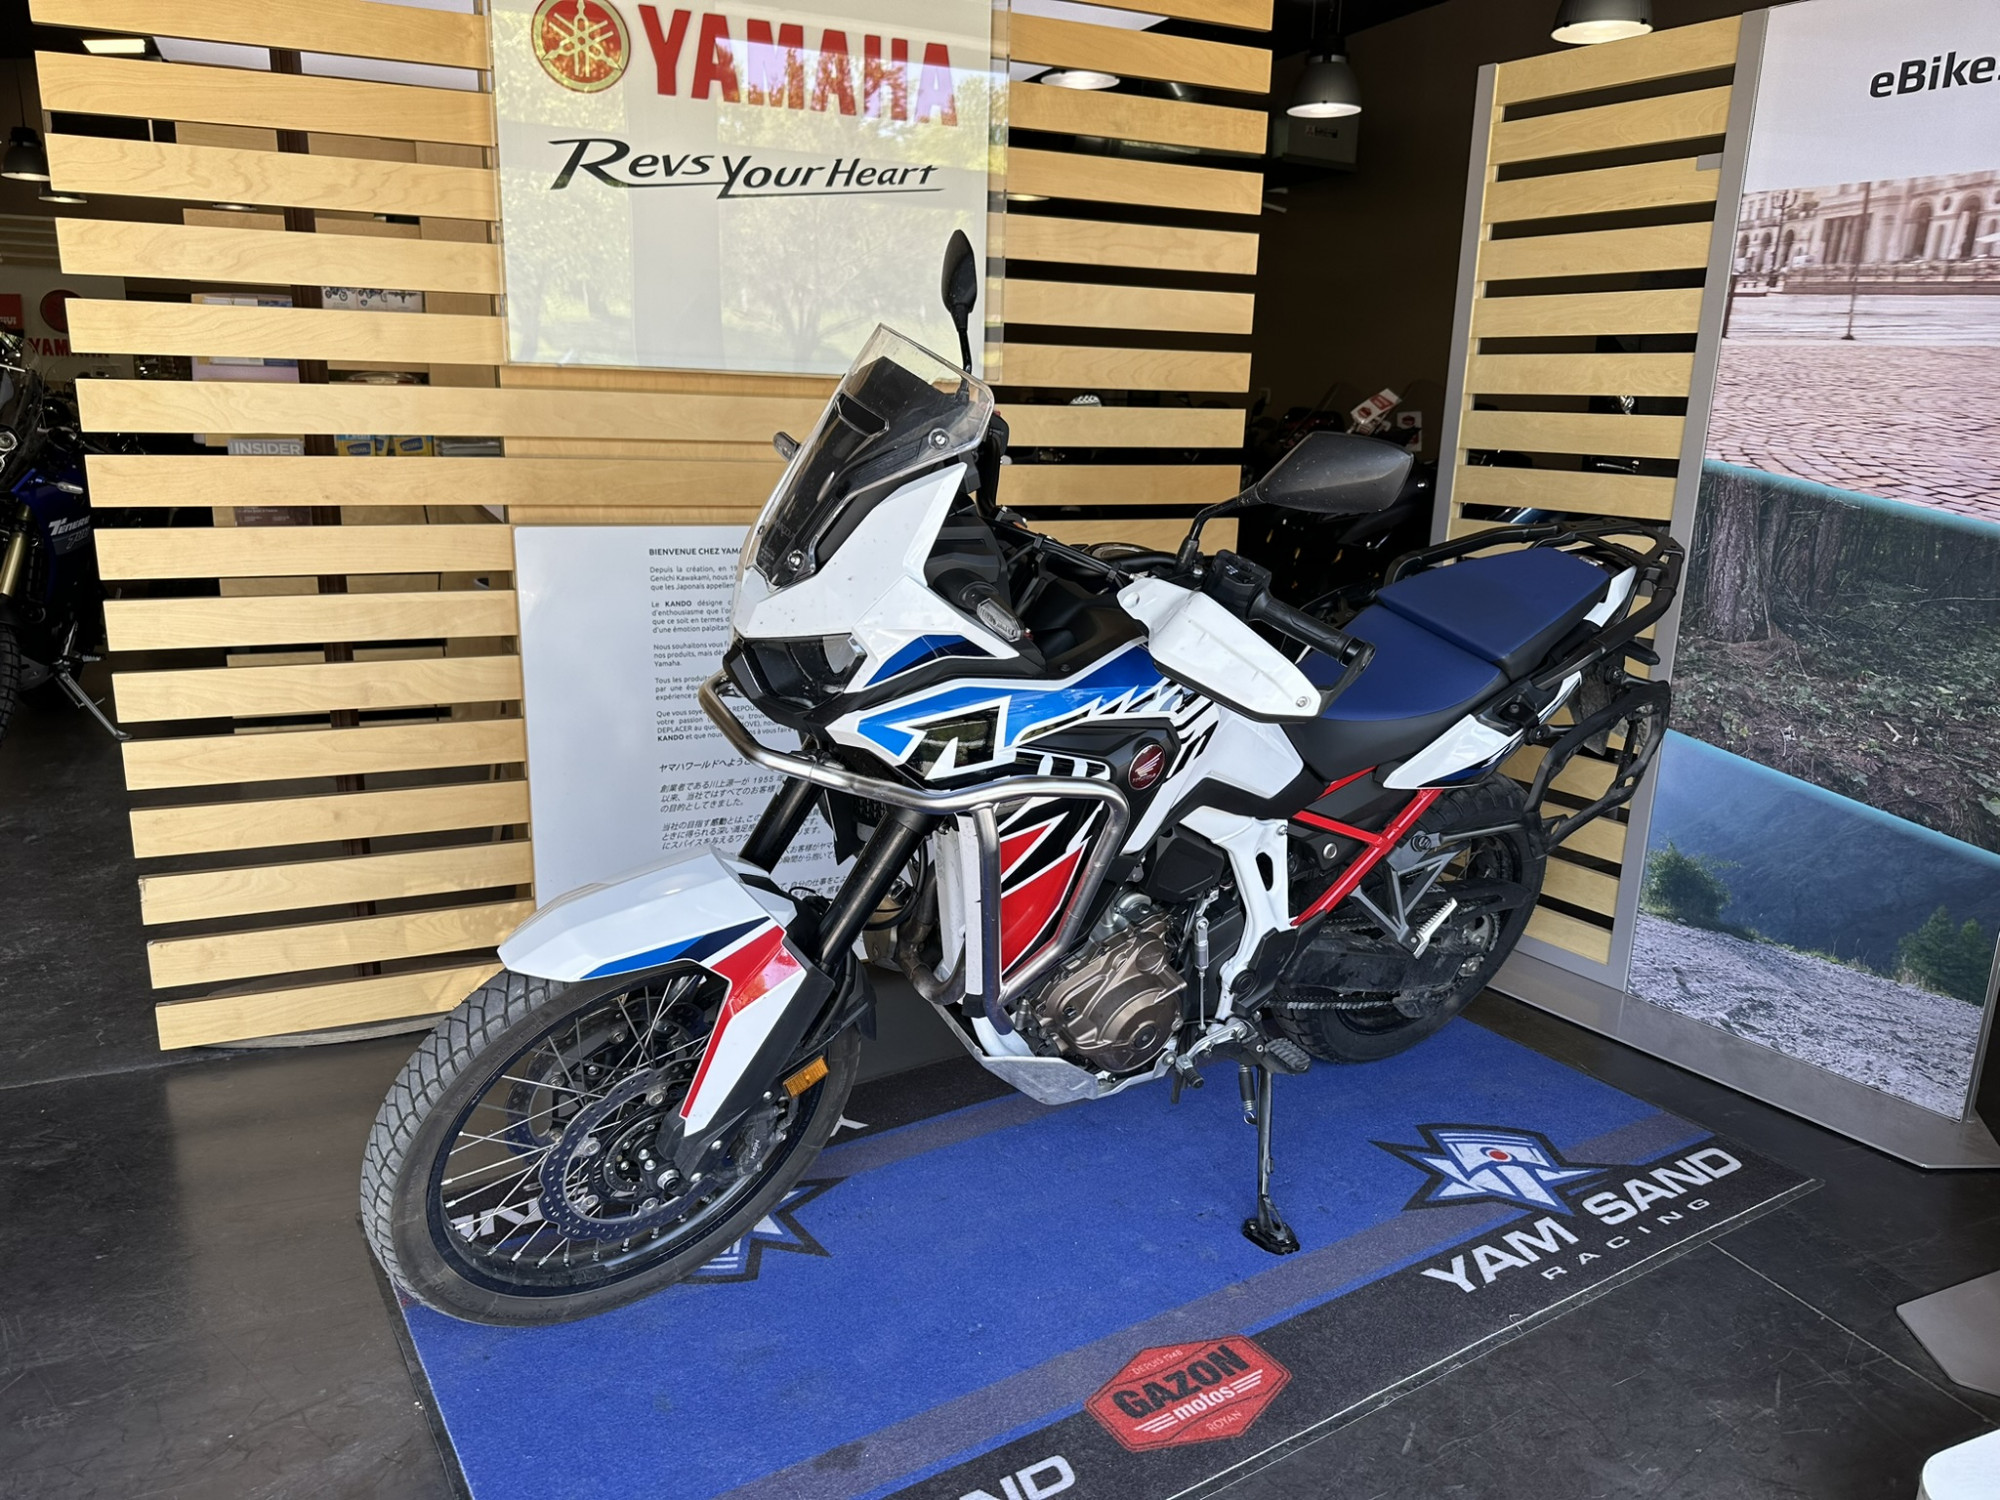 Annonce moto Honda Africa Twin CRF1000D STD